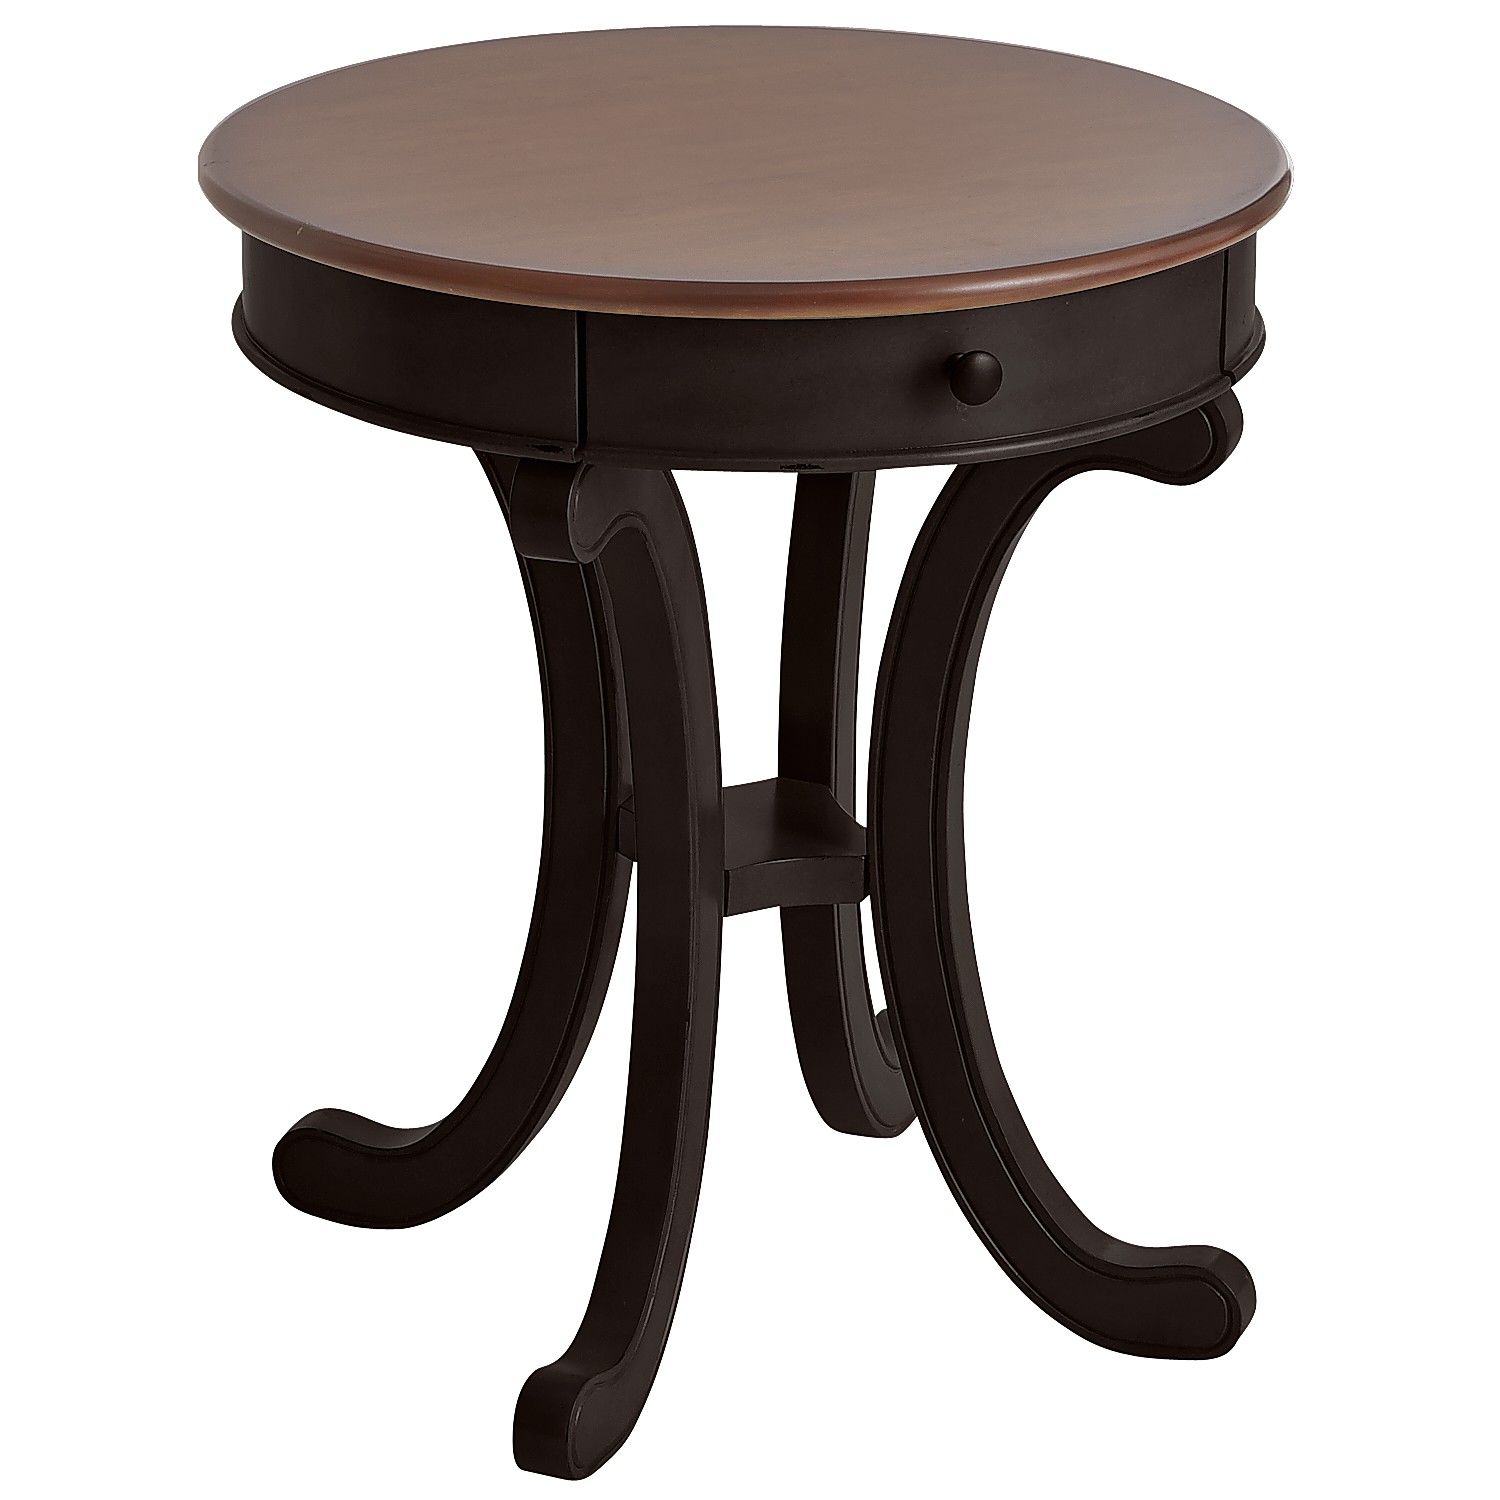 small black tables accent table round end ella rubbed pier imports mirrored cool retro furniture solid wood farm white leather chair large clock outdoor iron side narrow coffee